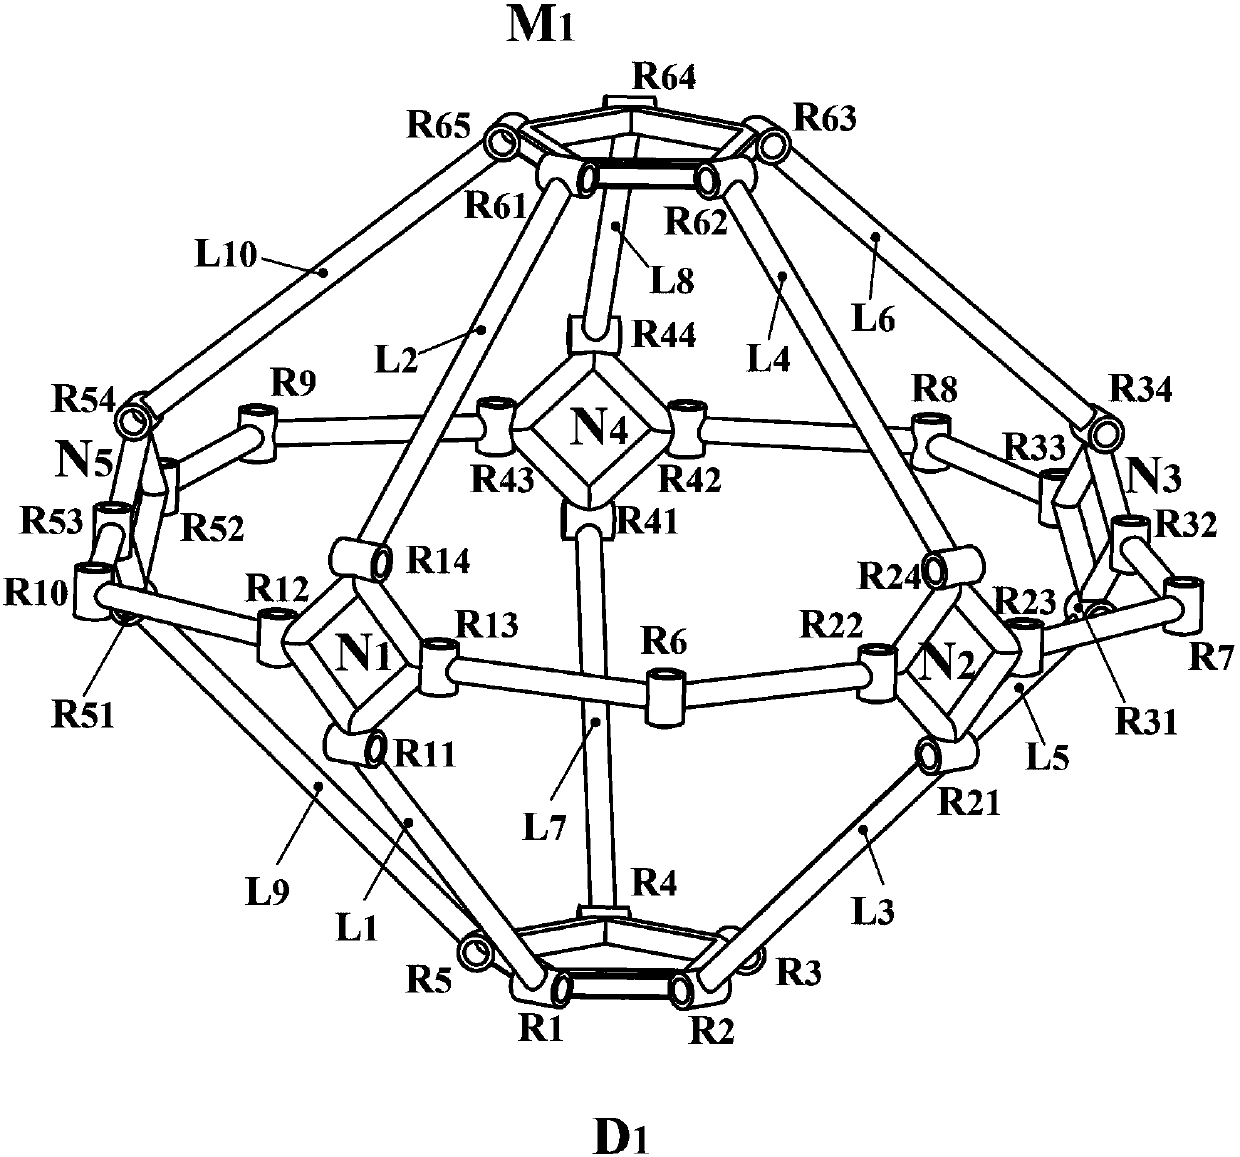 Pentagonal double-cone symmetrical coupling mechanism with single-degree-of-freedom movement